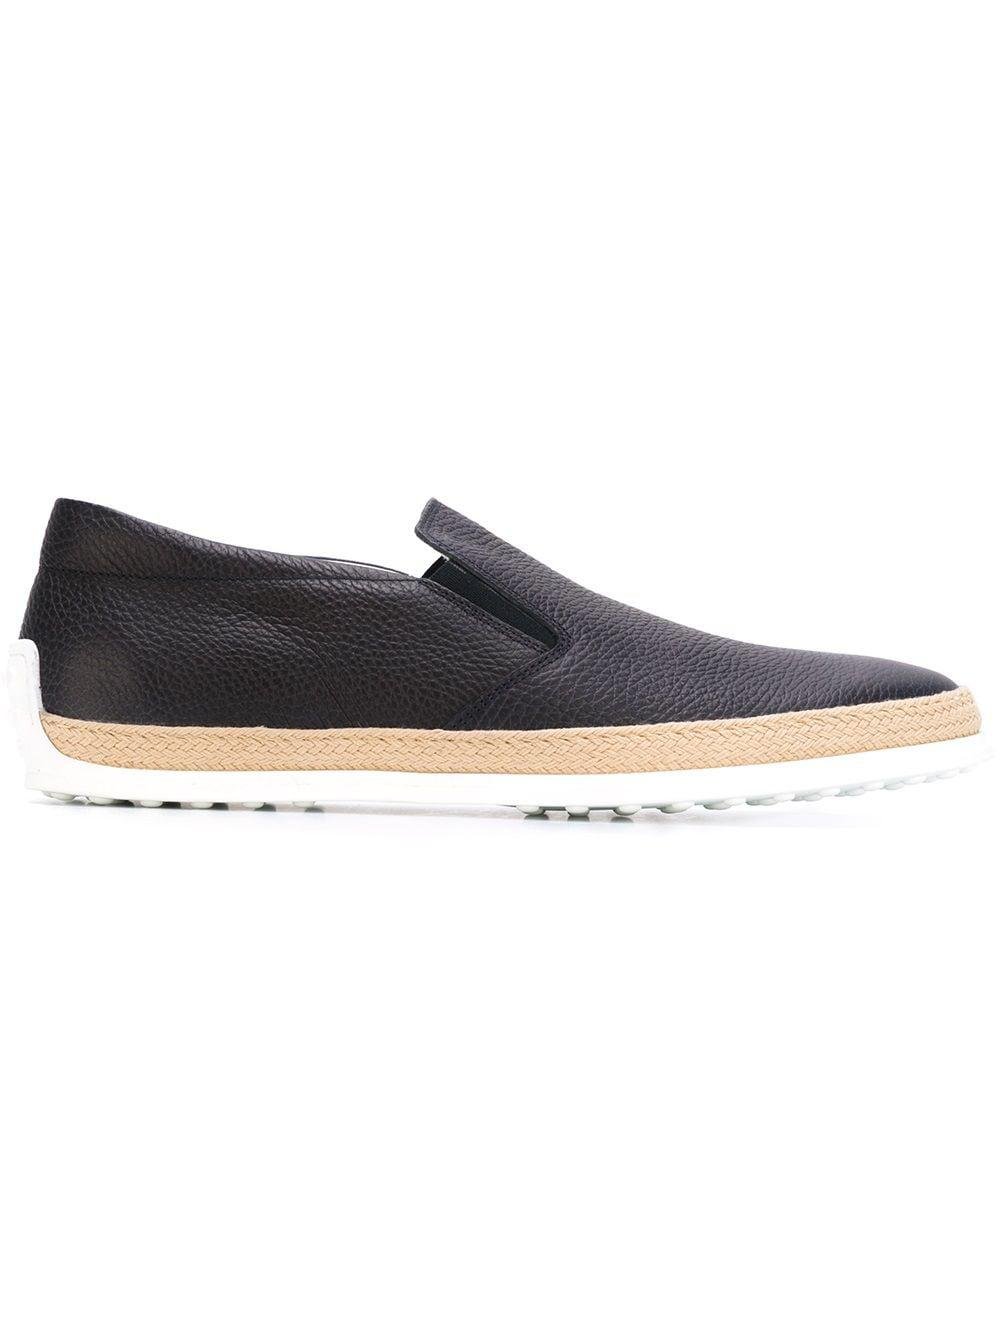 classic slip on sneakers by TODS